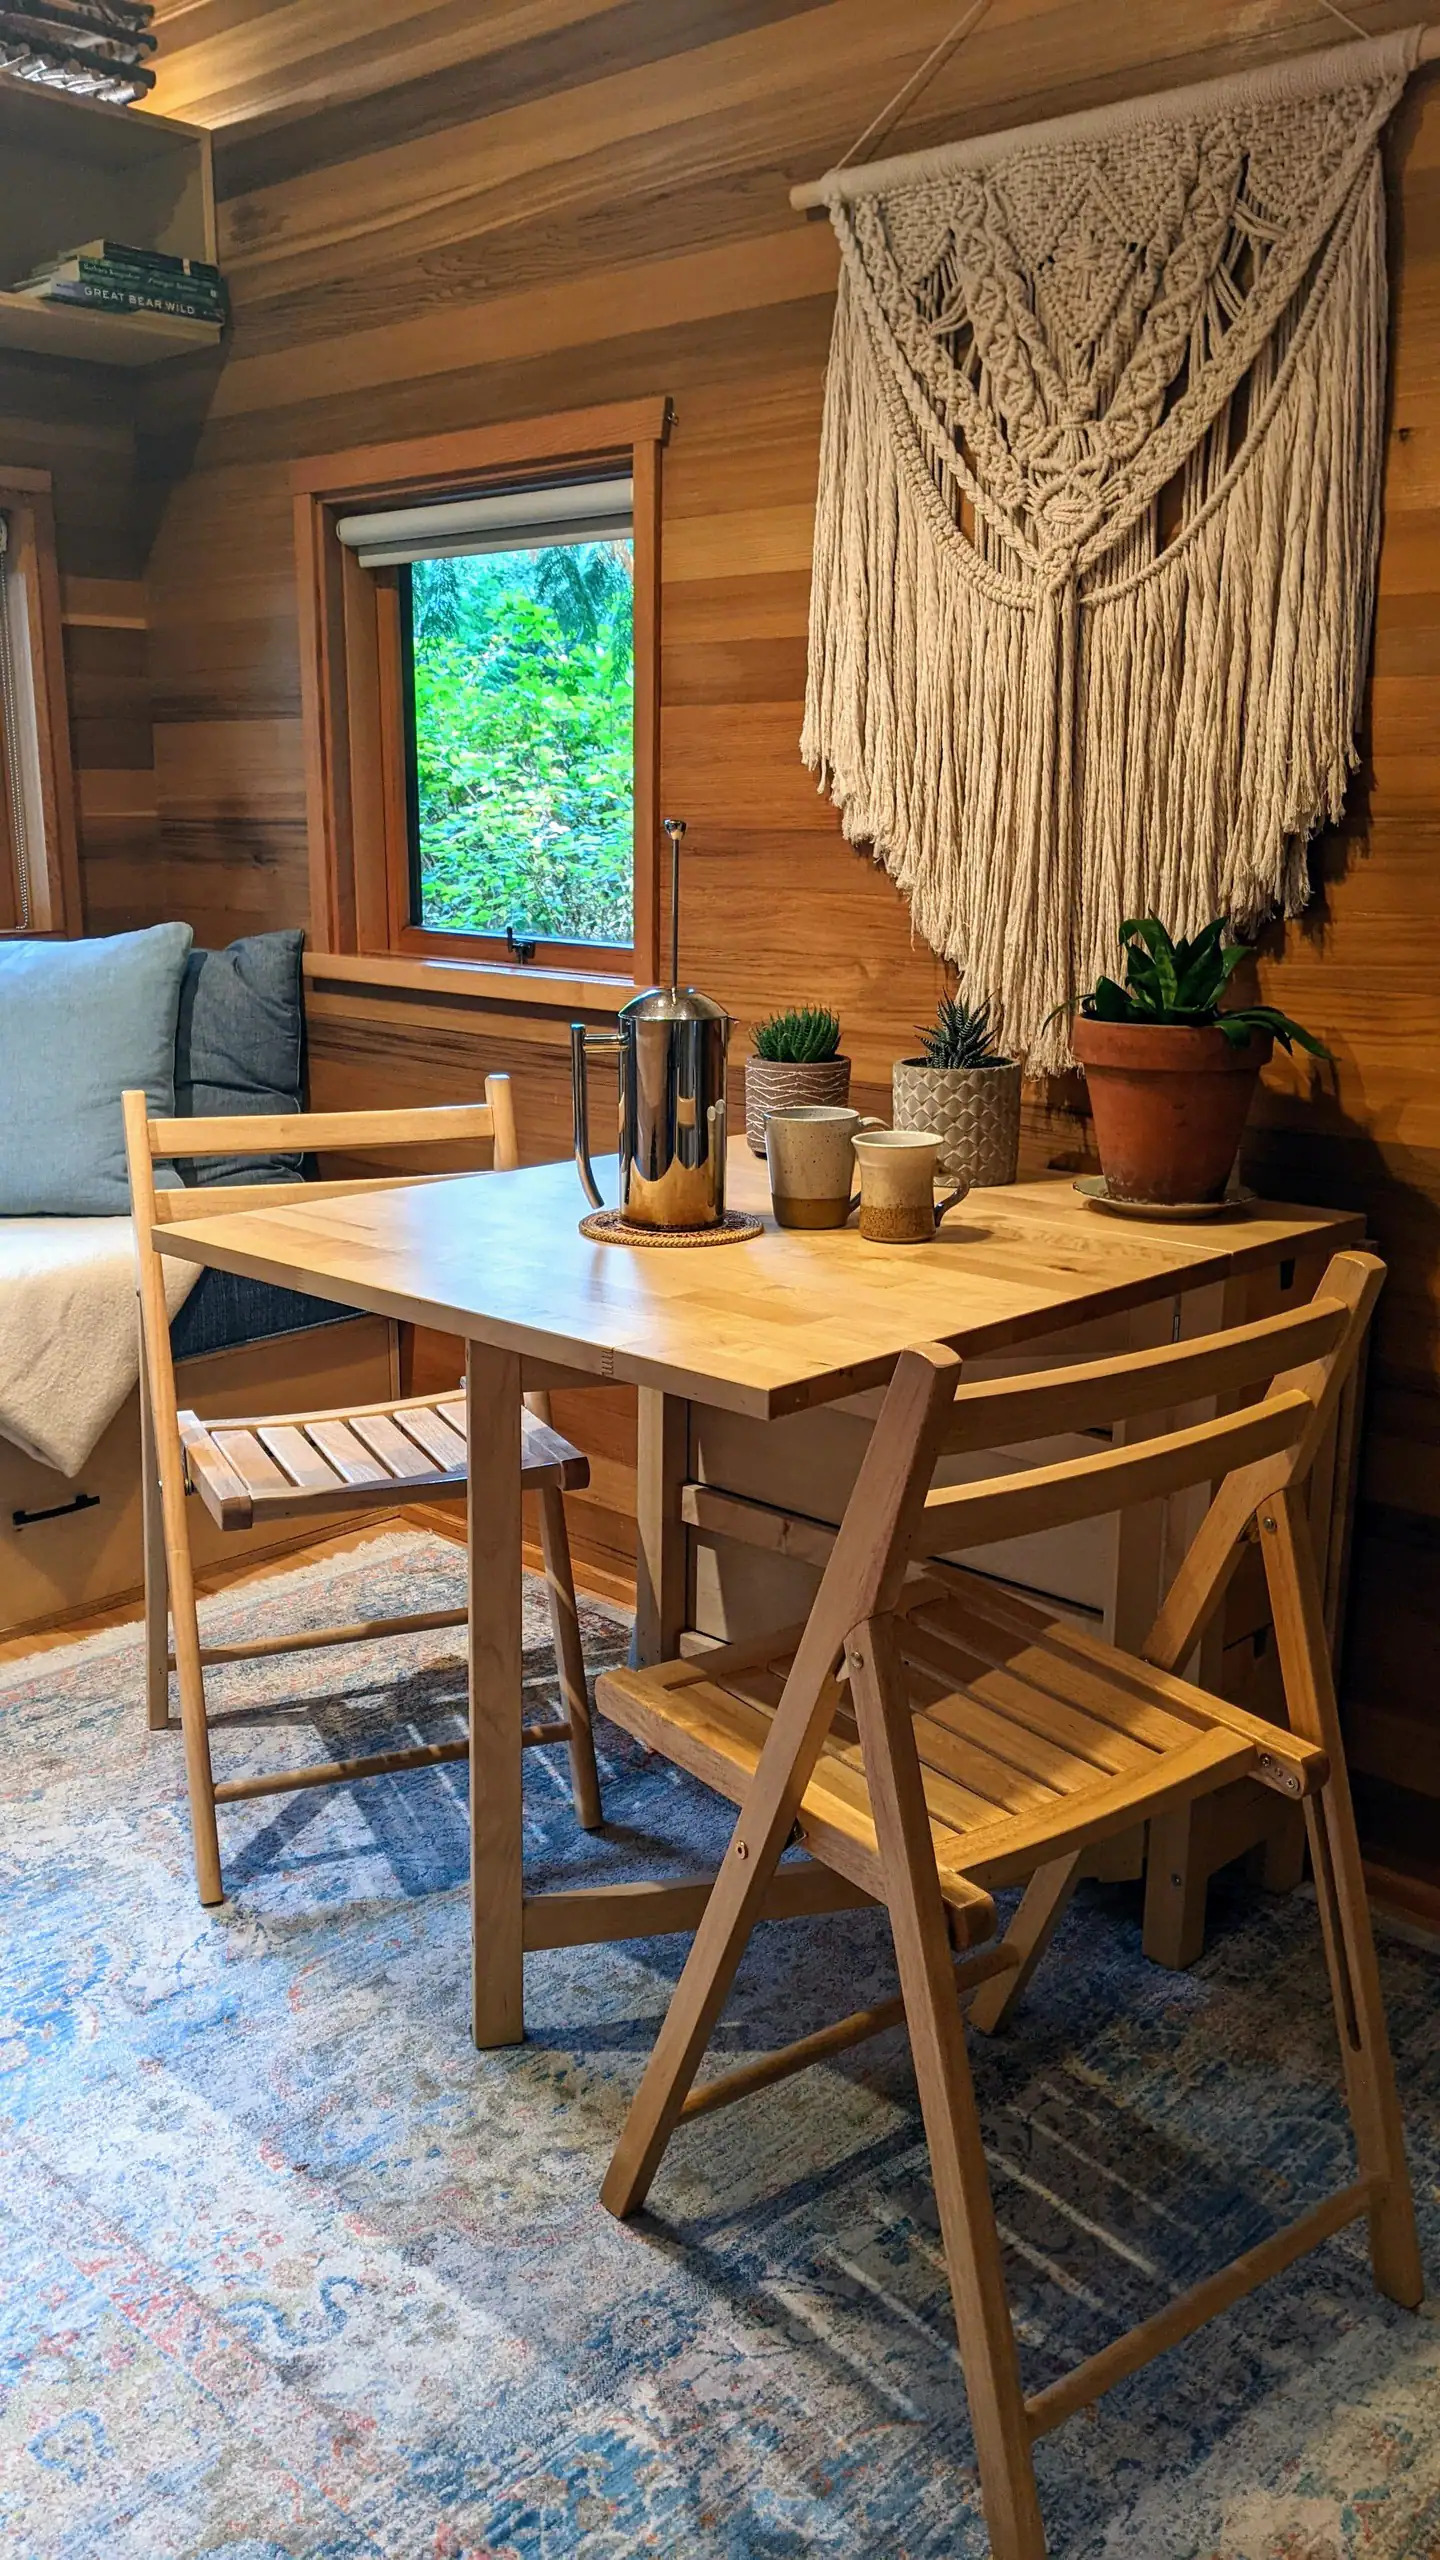 Dining room chairs and one desk, made of wood with a coffee and flowers on it